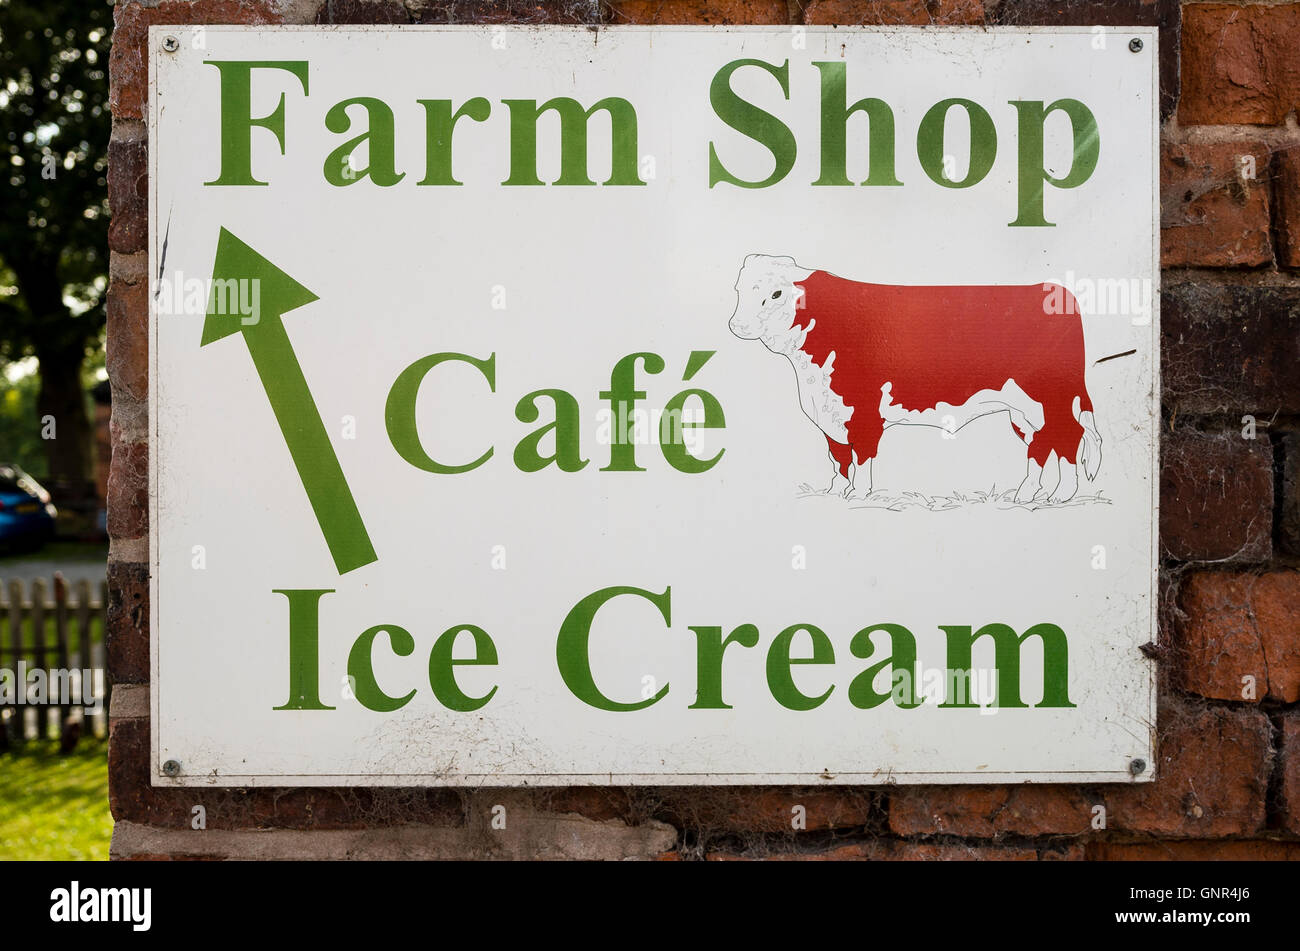 Sign showing direction to Farm Shop for cafe and sales of food and gift items Stock Photo